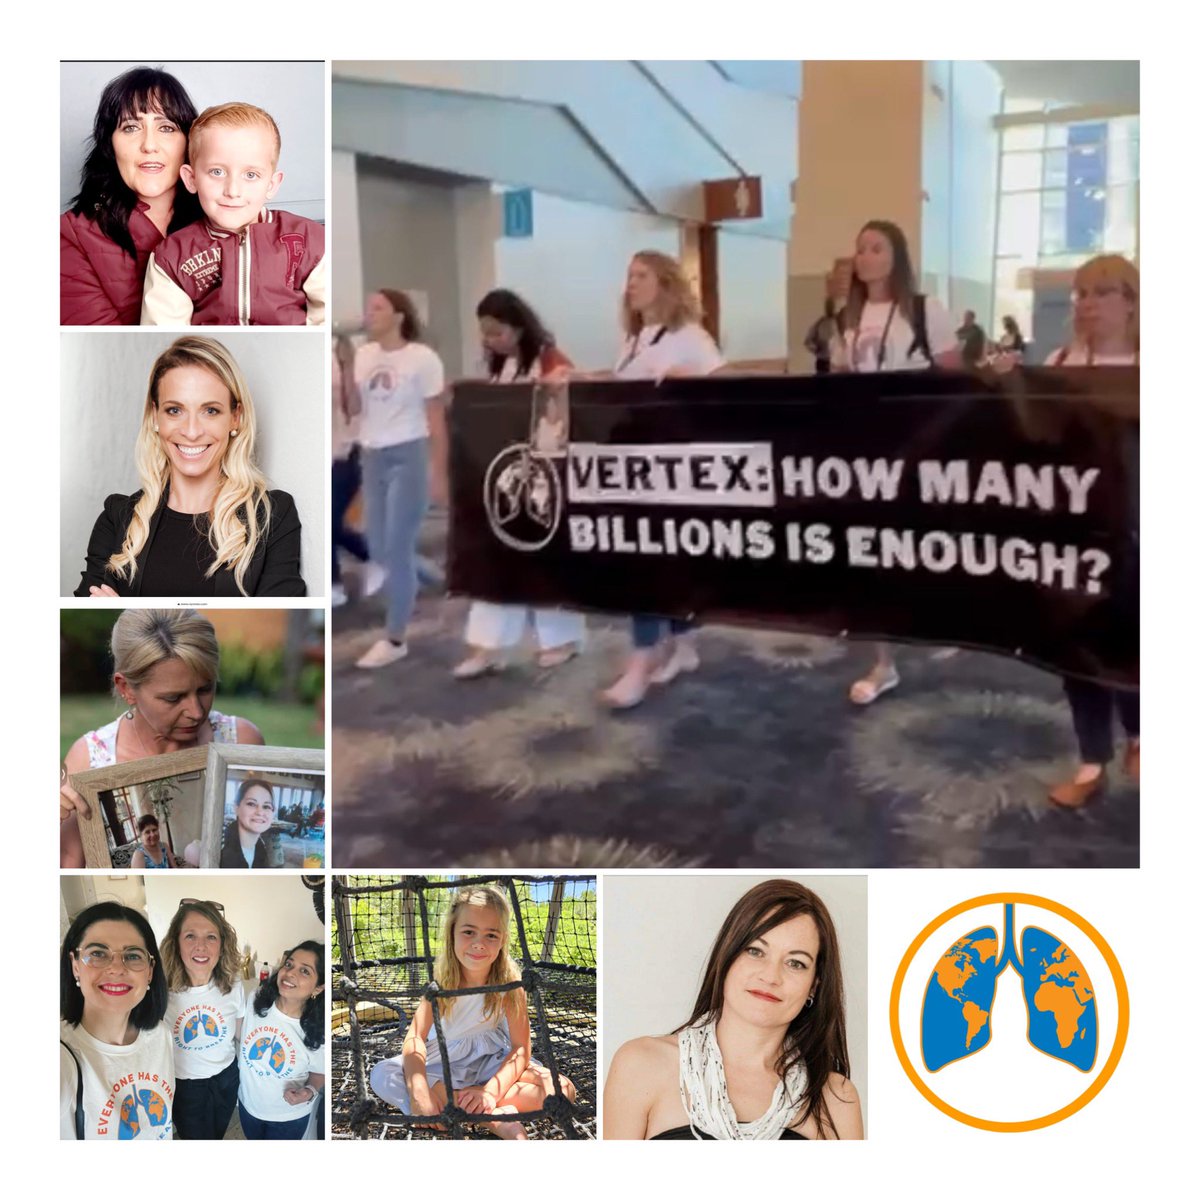 A shout out to all women in our amazing #CysticFibrosis community on #InternationalWomensDay, whether patient, family member or advocate. Together we are strong, resilient & determined - we will not give up until ALL our loved-ones have access to the medicines they need. 💊🌍